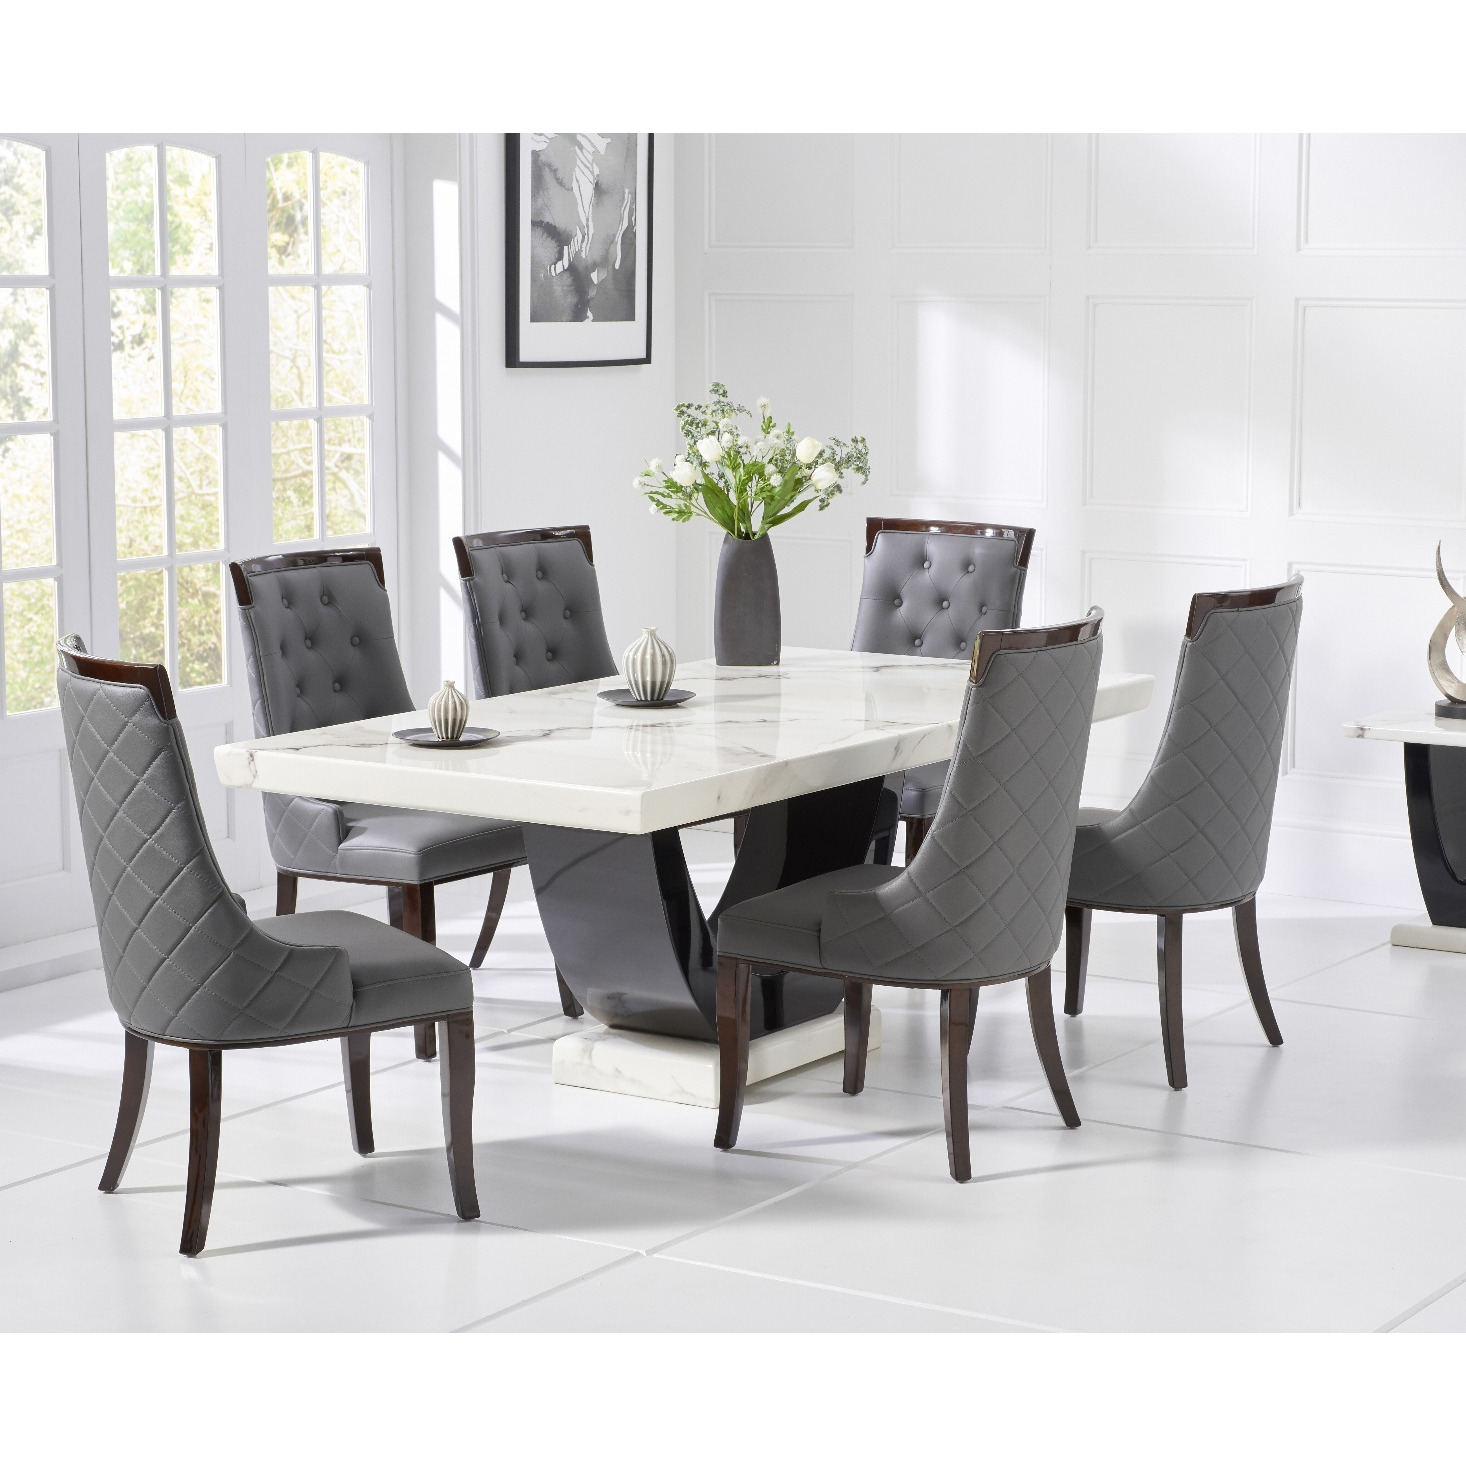 Raphael 200cm White and Black Pedestal Marble Dining Table With 6 Cream Francesca Chairs